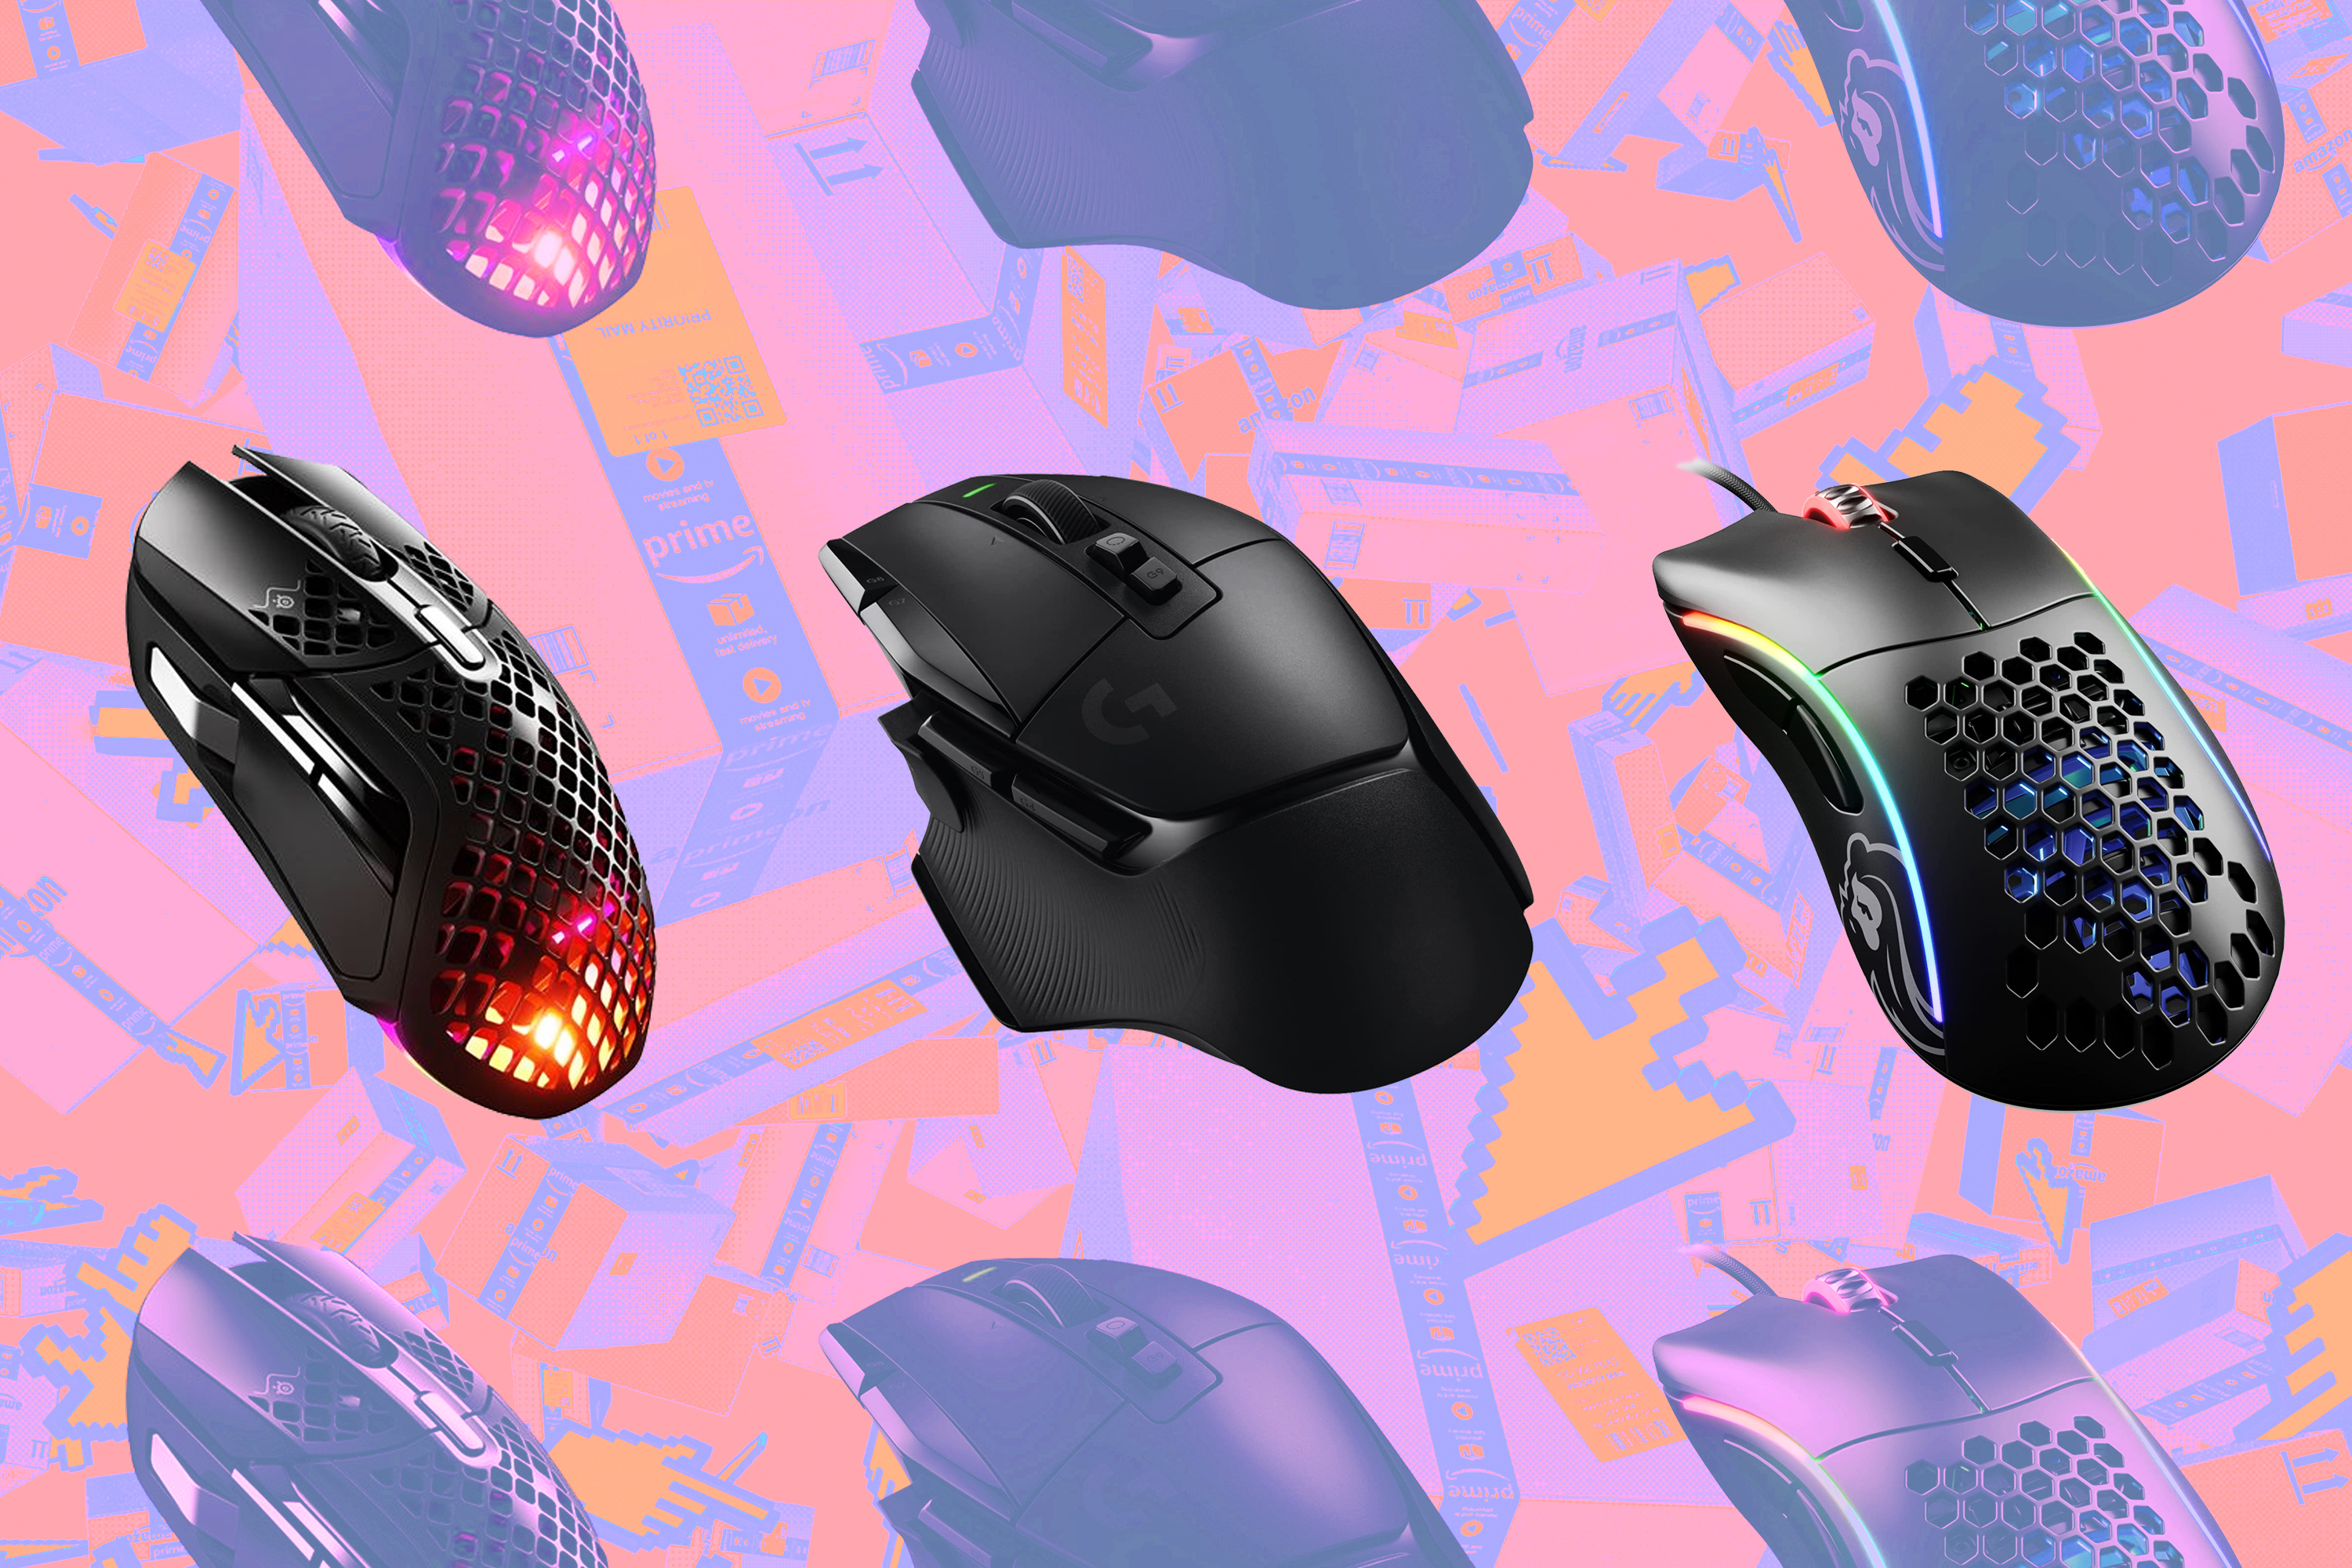 A composite image of the SteelSeries Aerox 5, Logitech G502 X, and Glorious Model D gaming mice